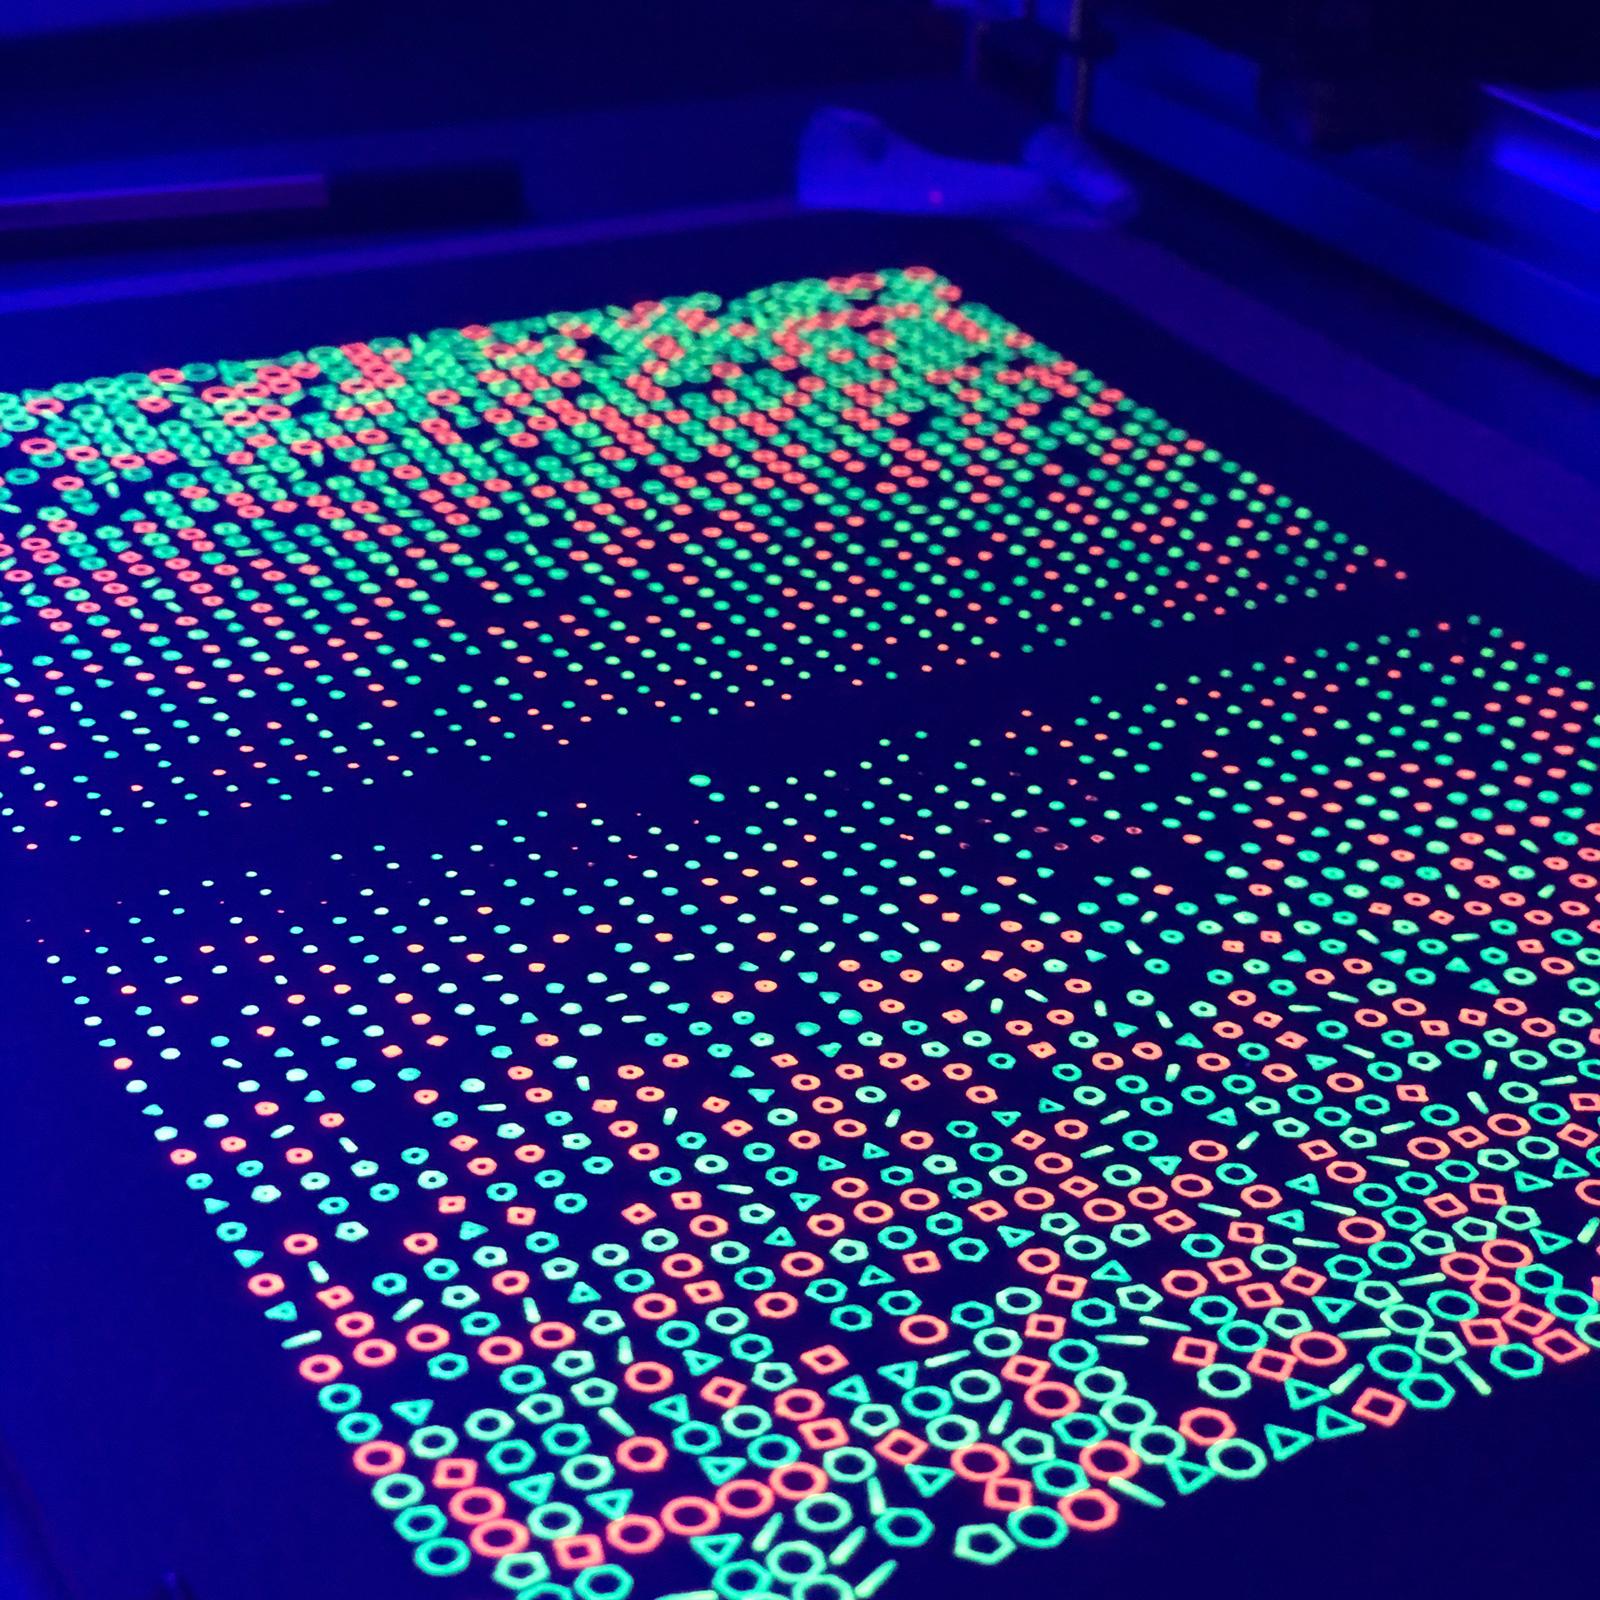 Black paper with a grid of many neon orange, yellow, and green printed shapes, glowing under a dark-purple illumination of a UV light